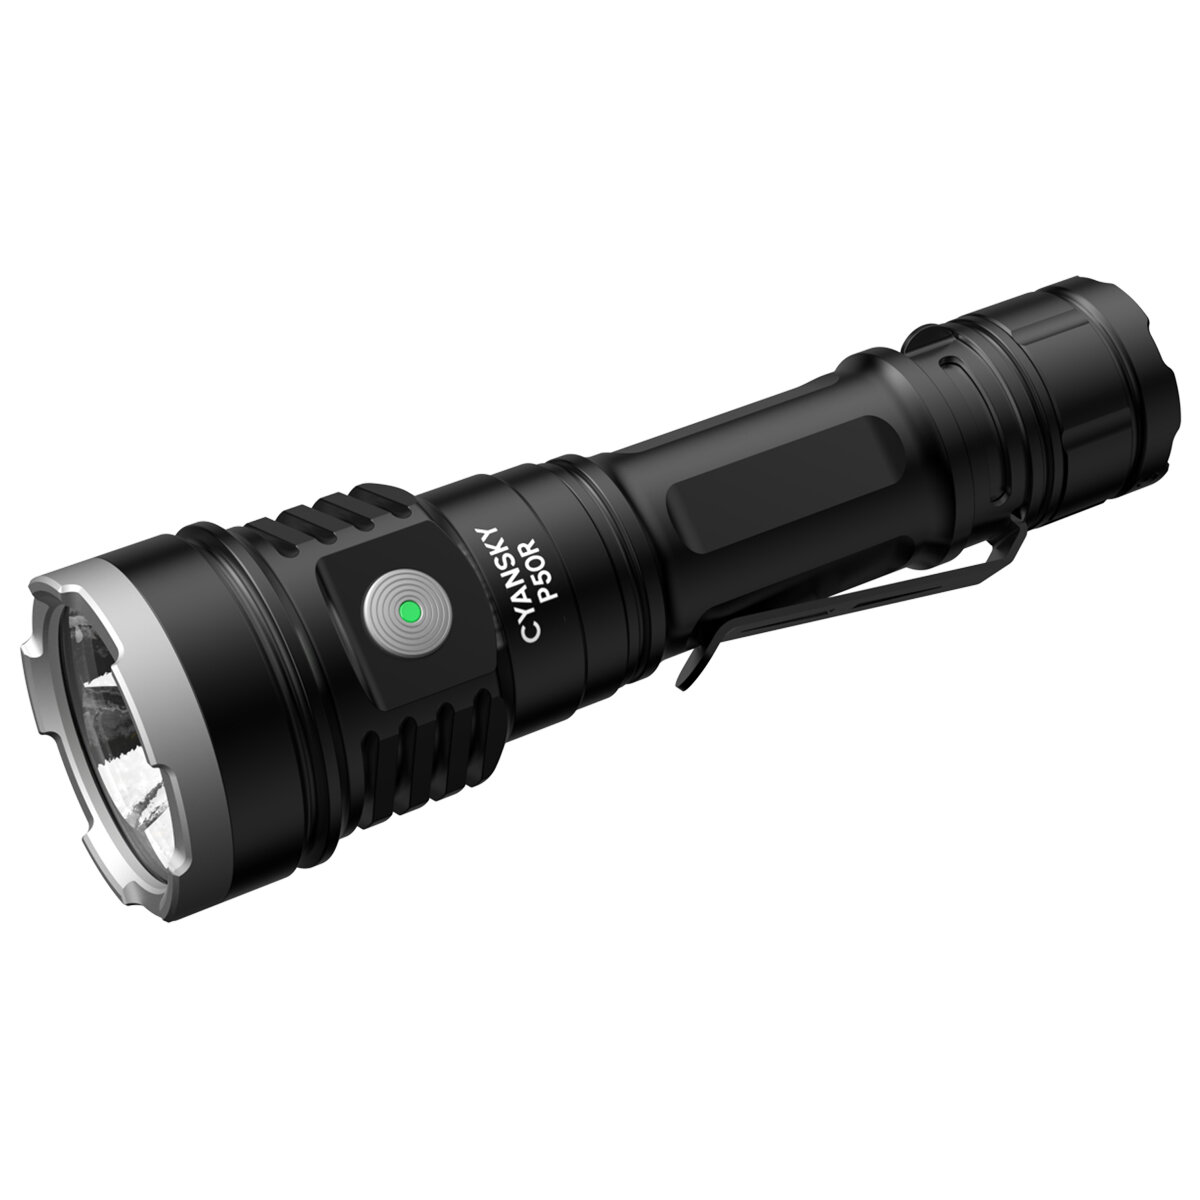 

CYANSKY P50R 12000lm Multifunctional Strong Light Outdoor Flashlight High Lumen Powerful LED Tactical Torch For Outdoor